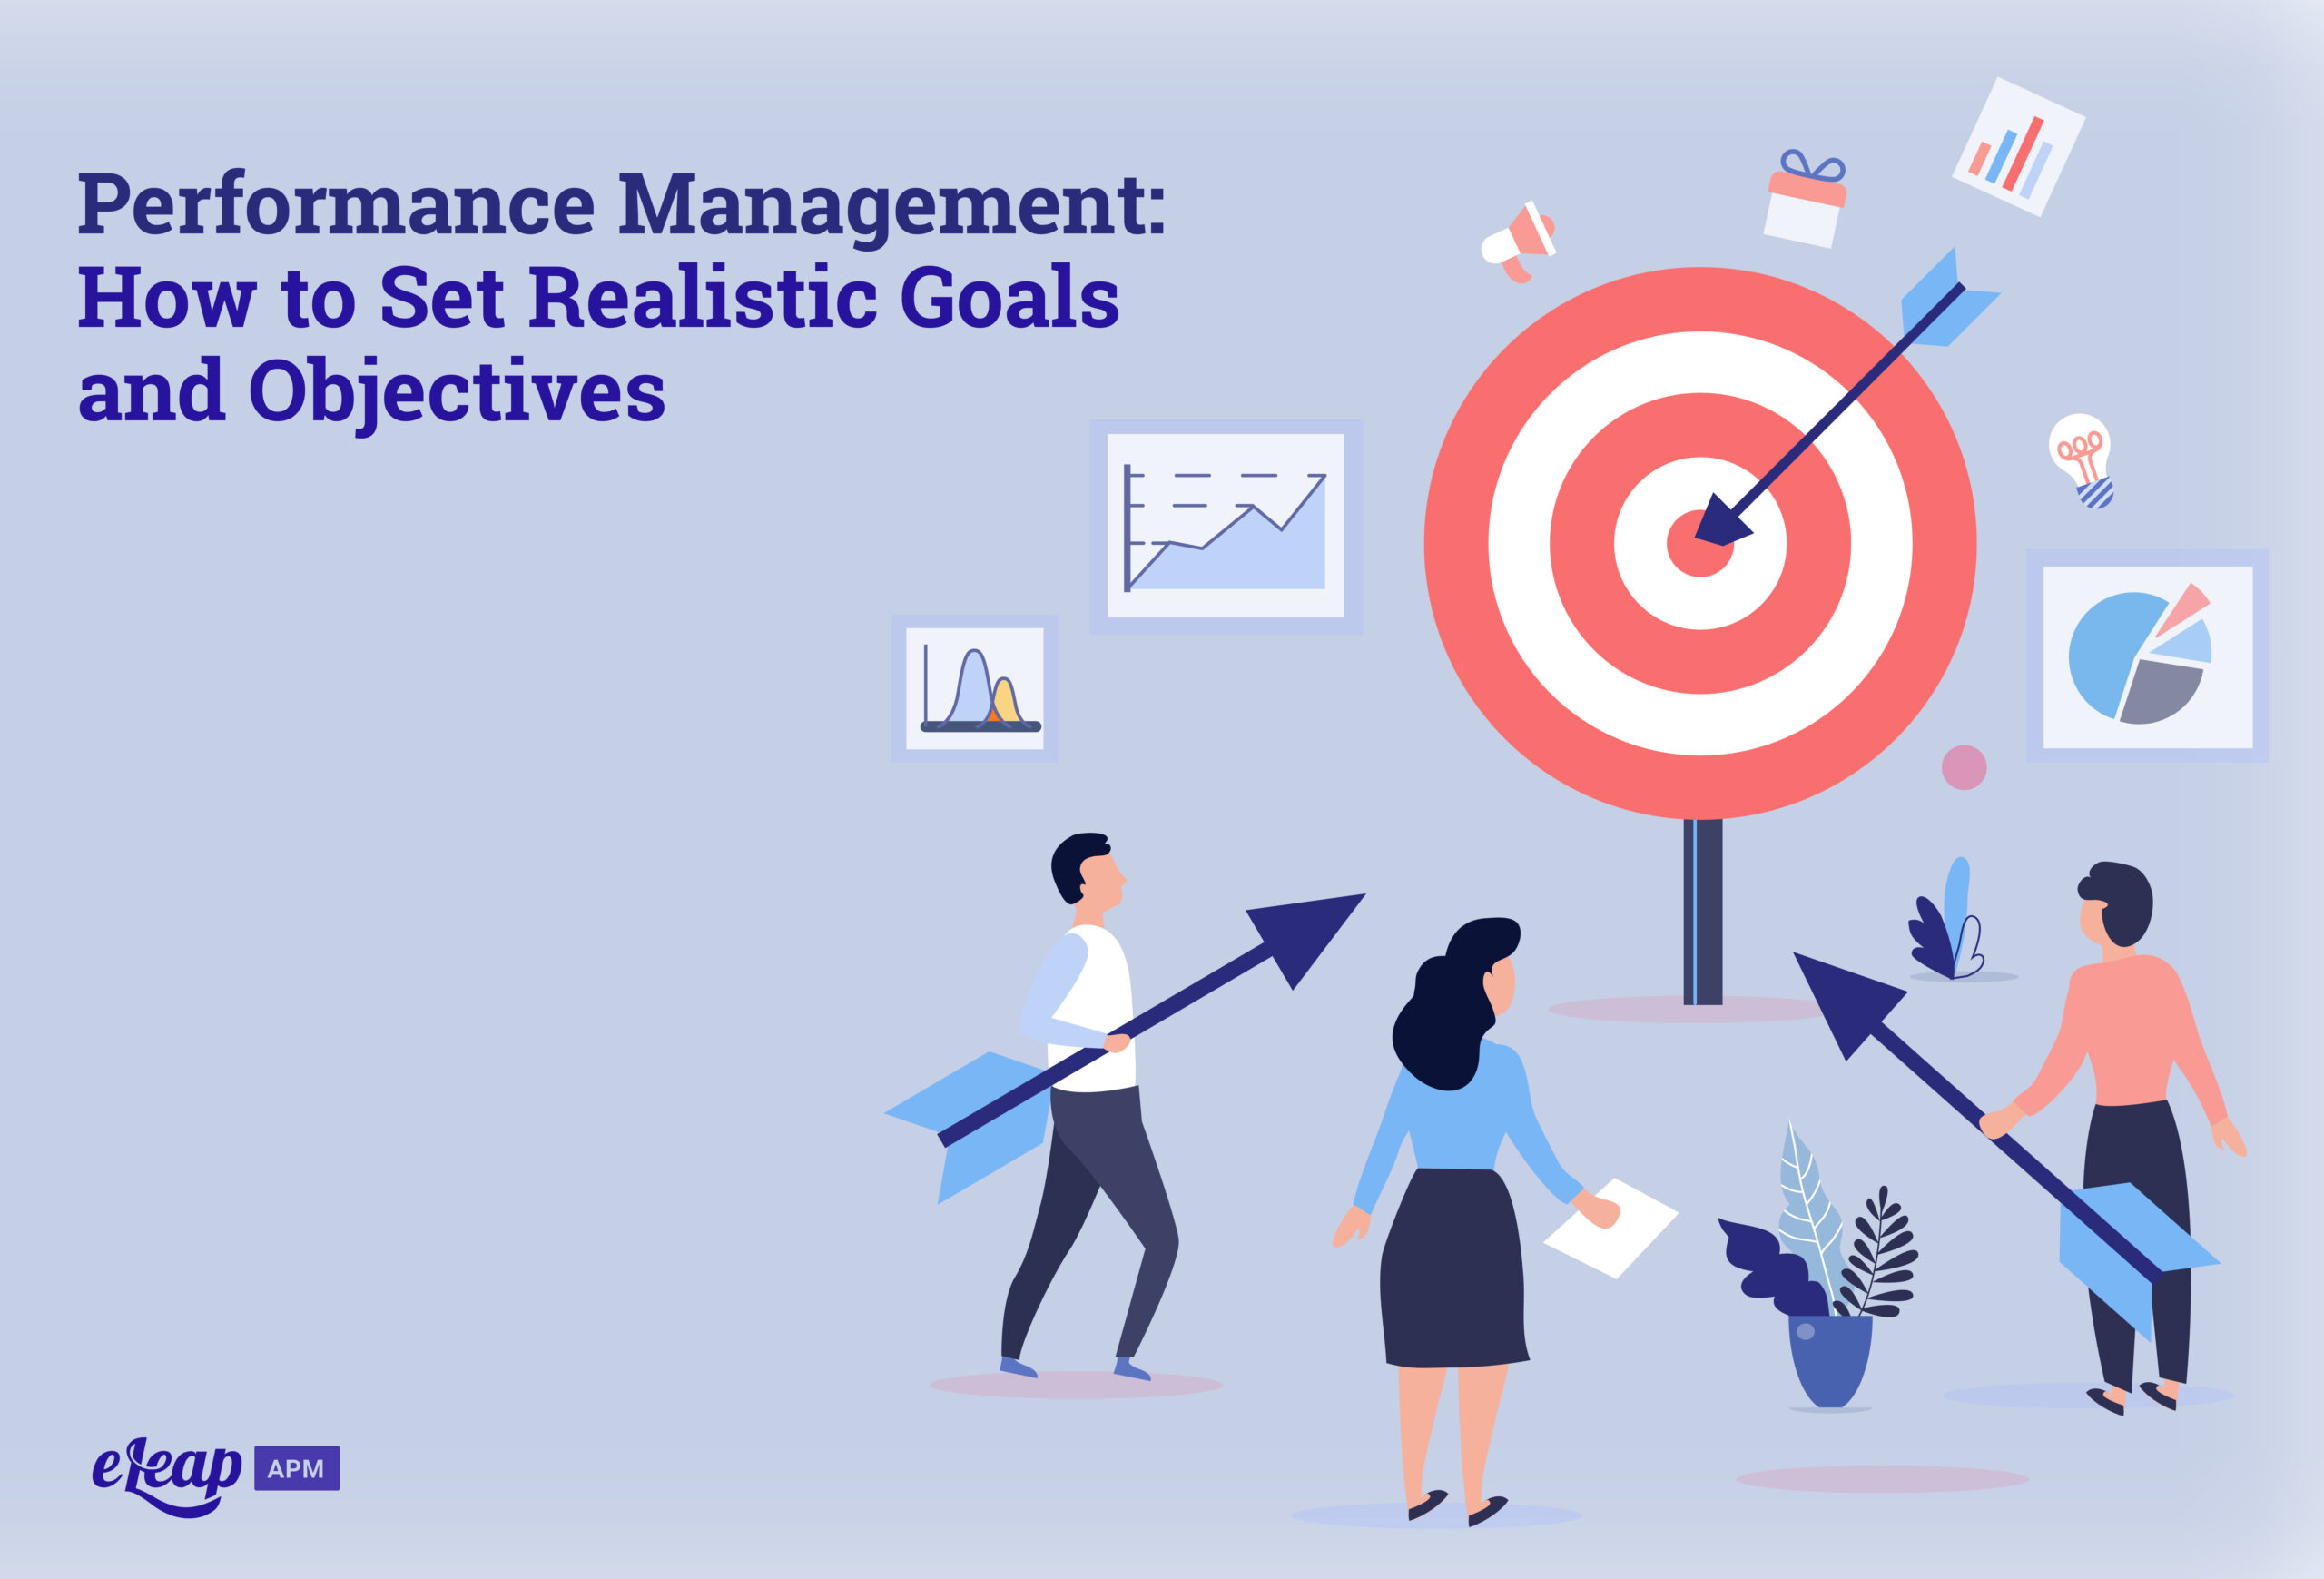 Performance Management: How to Set Realistic Goals and Objectives